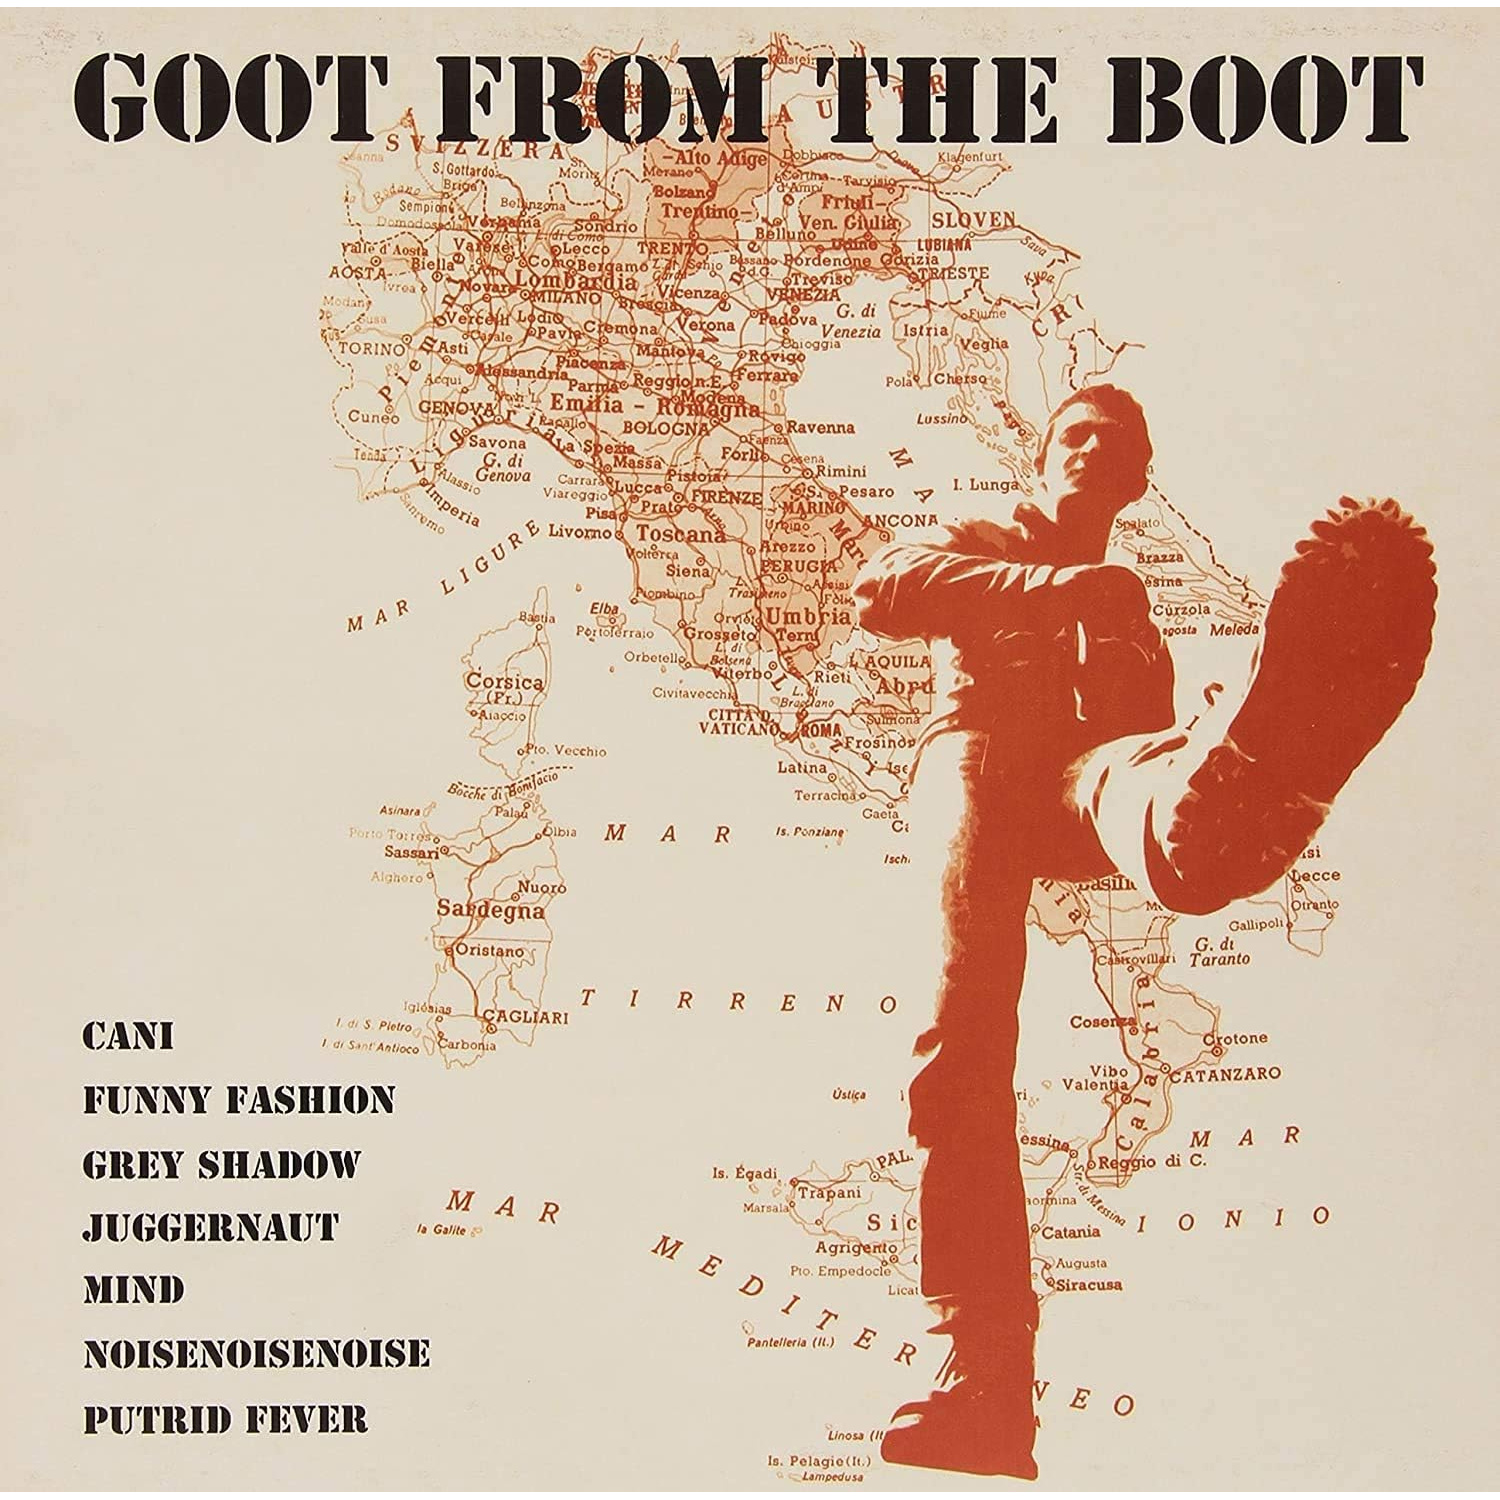 GOOT FROM THE BOOT - REVISITED